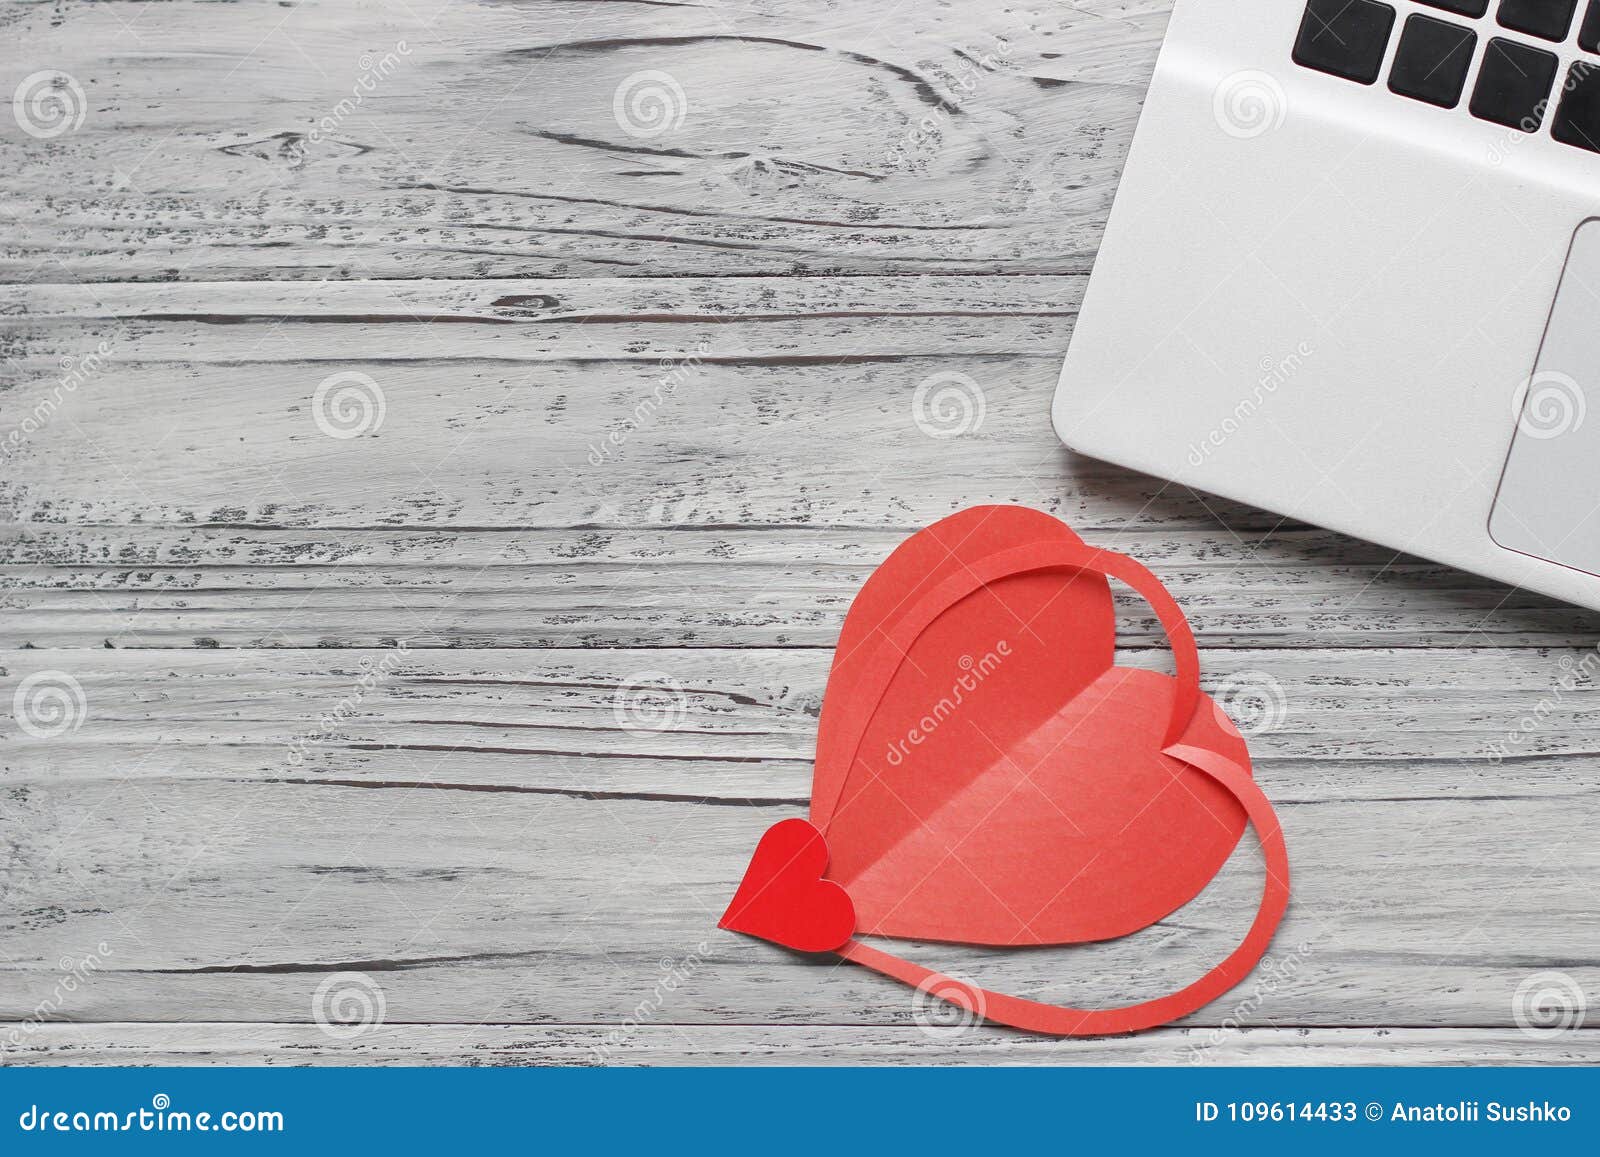 Background of a Valentine on a Wooden Table with a Laptop and he ...